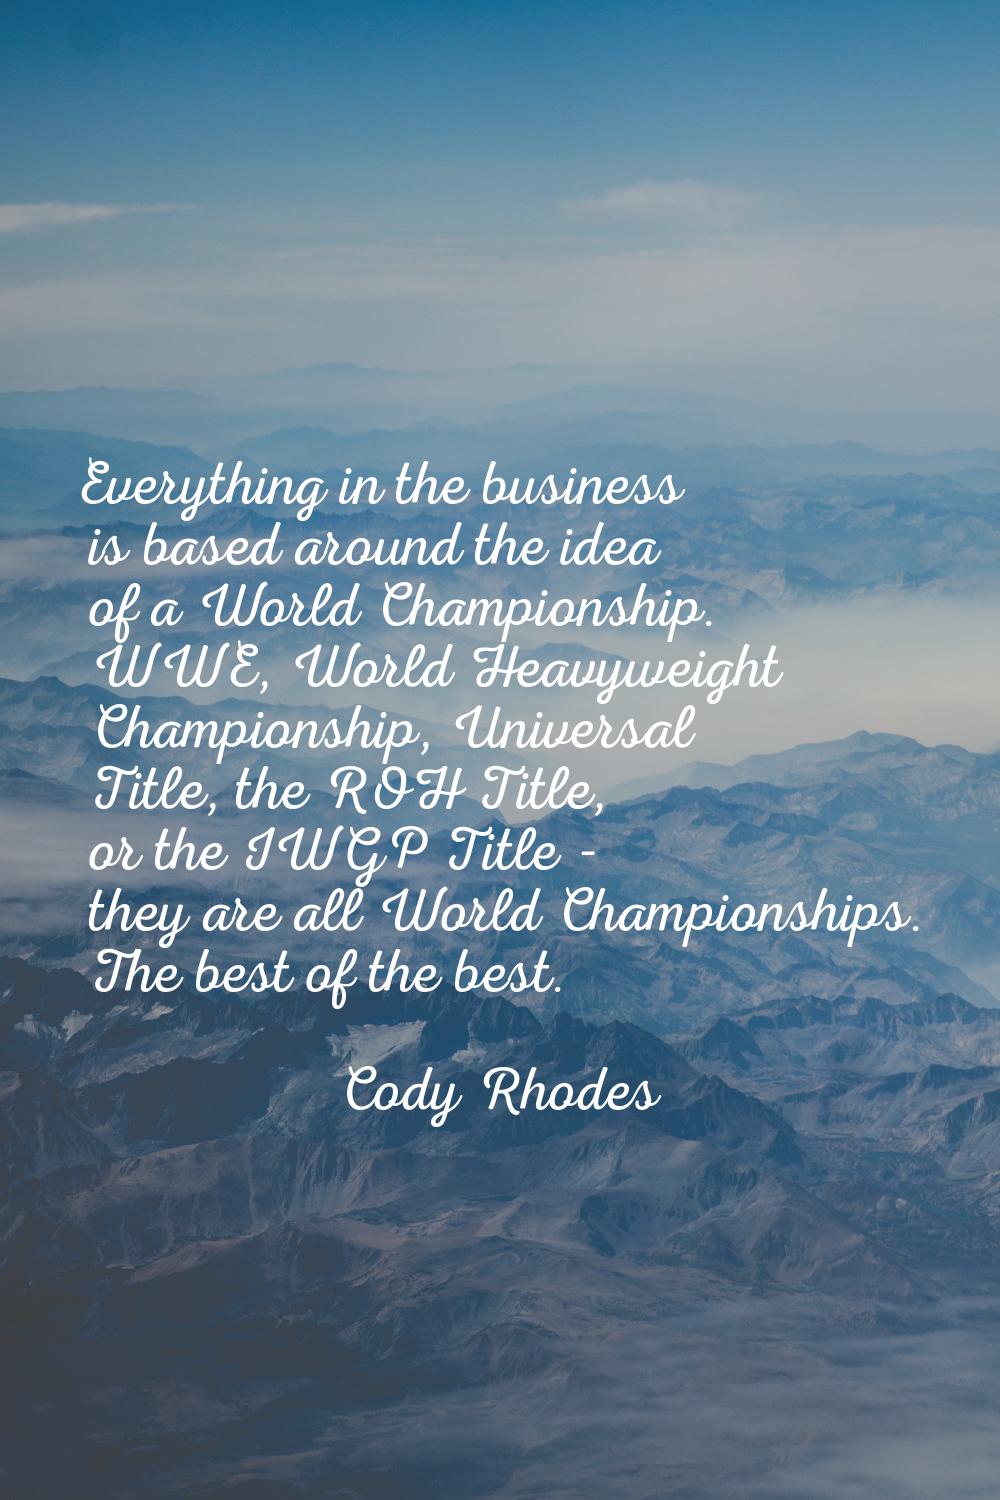 Everything in the business is based around the idea of a World Championship. WWE, World Heavyweight